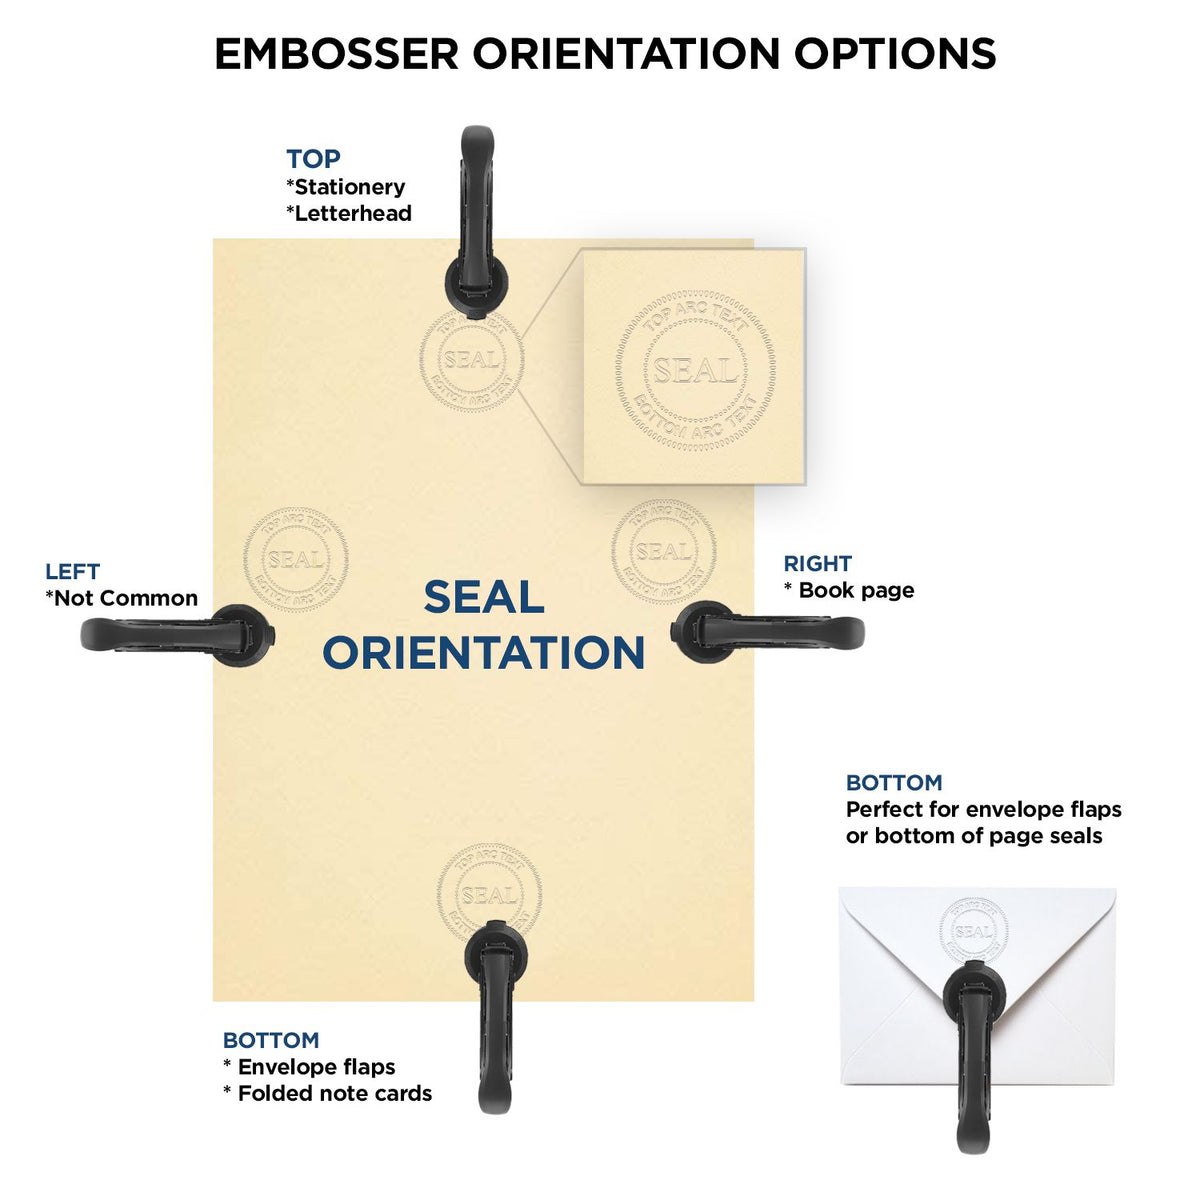 An infographic for the Heavy Duty Cast Iron Georgia Land Surveyor Seal Embosser showing embosser orientation, this is showing examples of a top, bottom, right and left insert.